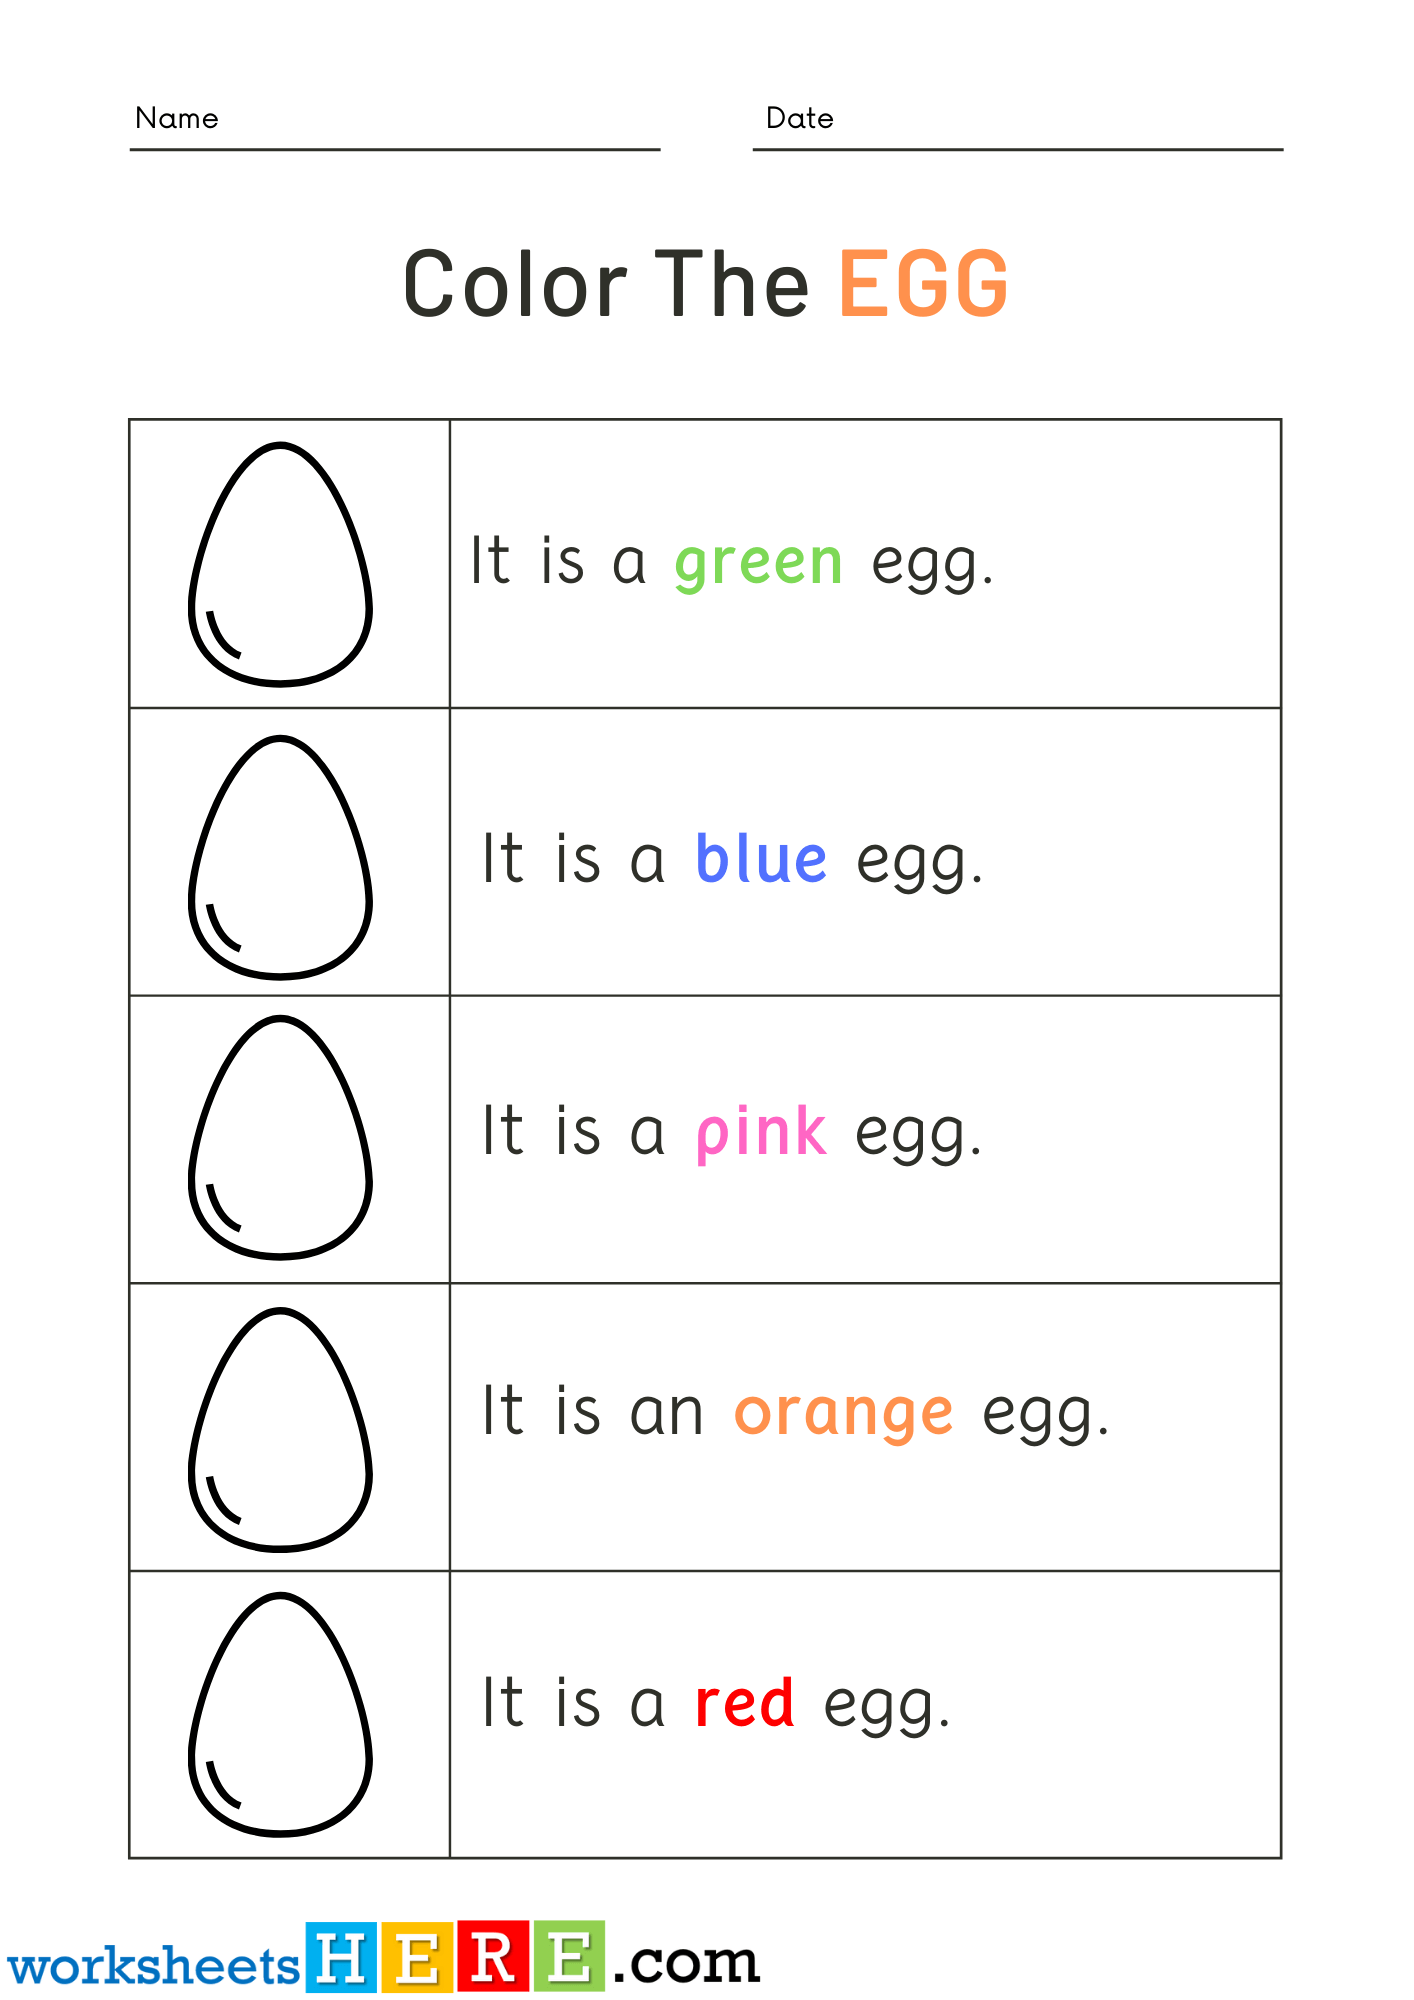 Read Words and Color Egg Pictures Activity PDF Worksheets For Kindergarten